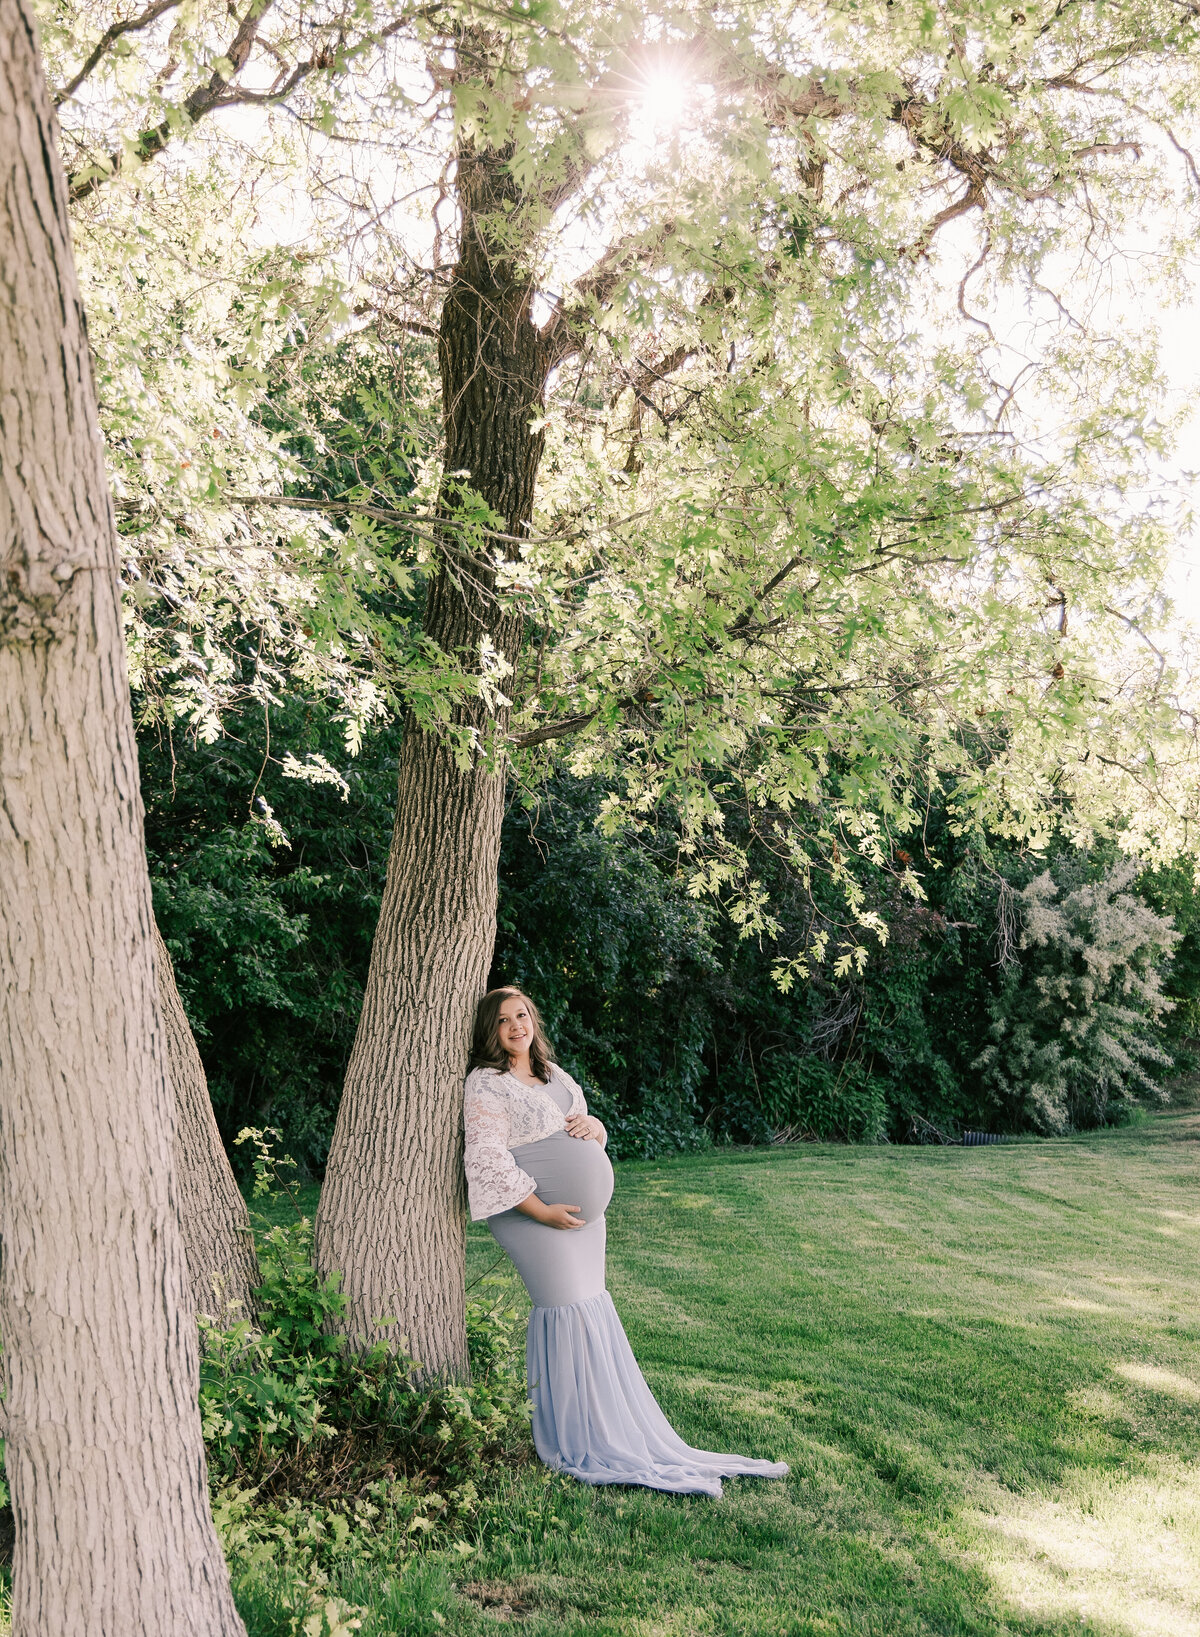 A young mother rests on a tree during her maternity shoot by Diane Owen Photography.